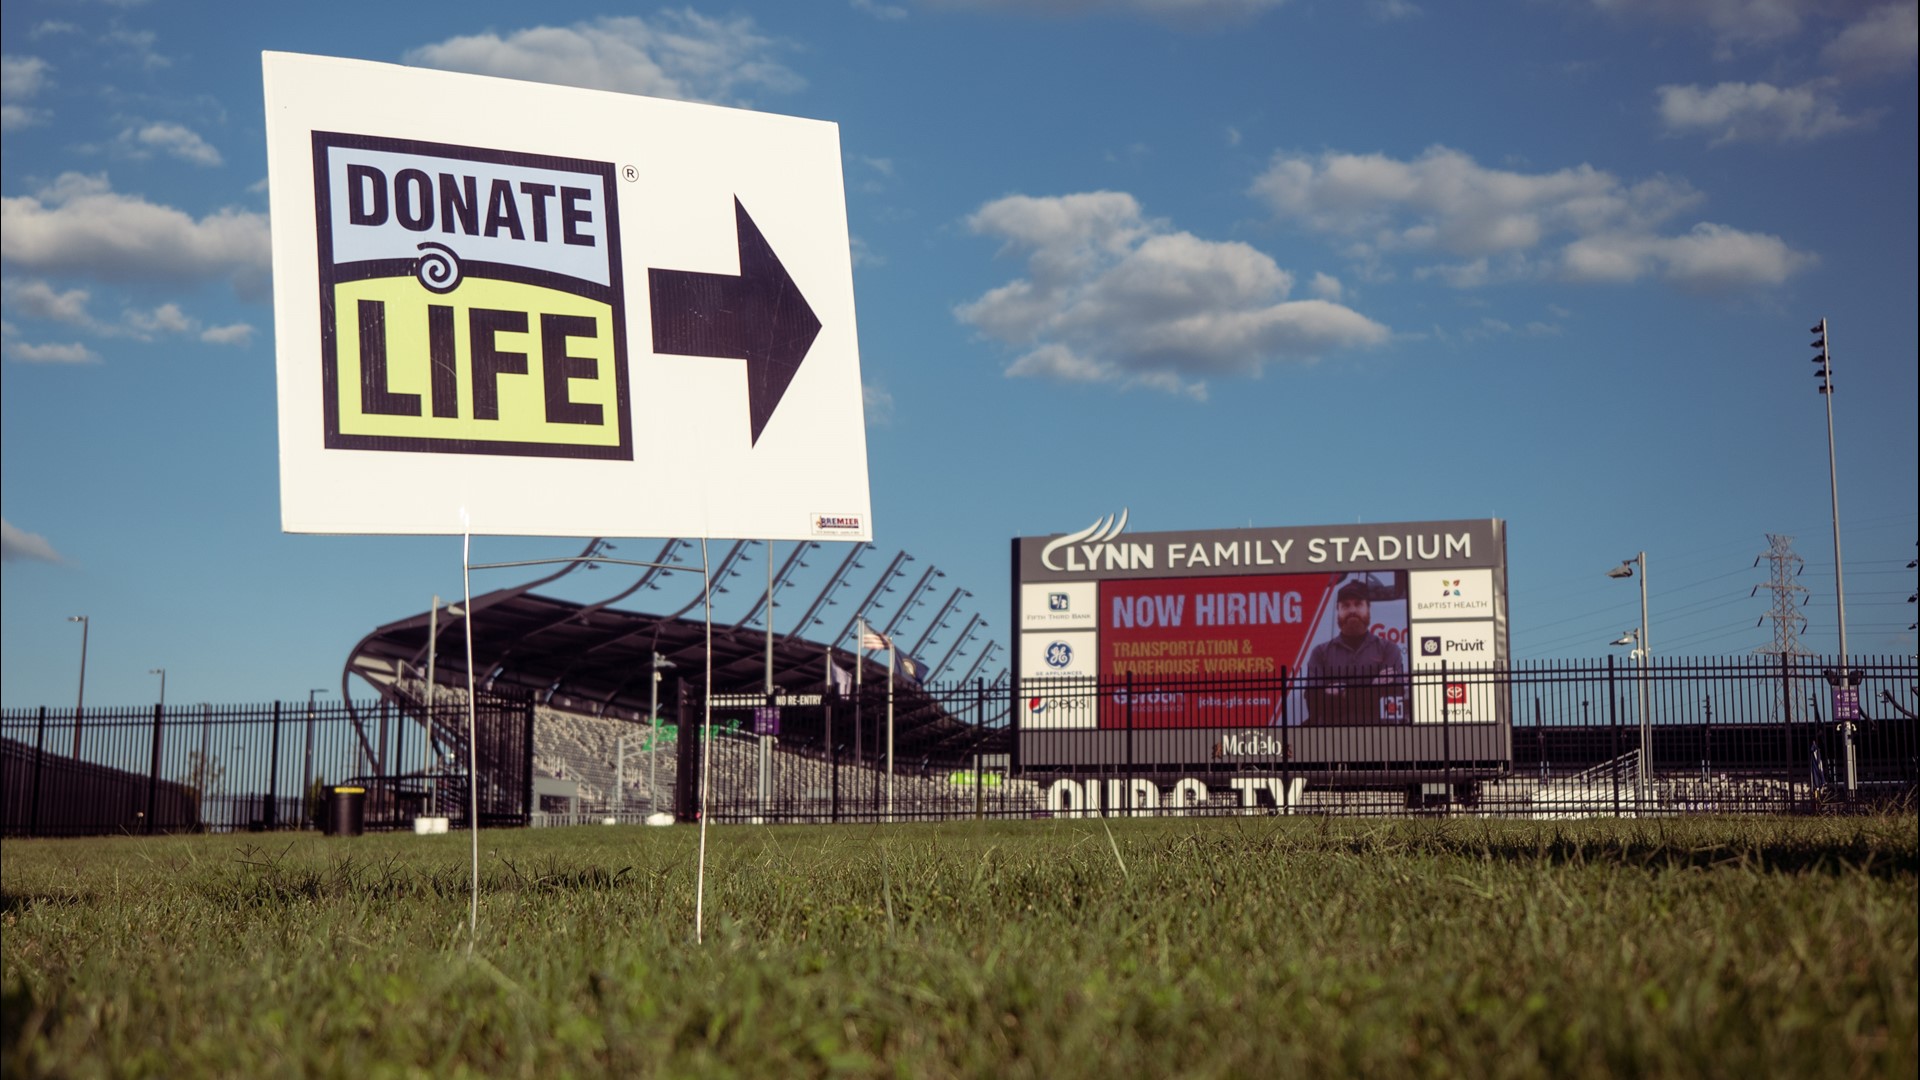 Donate Life KY hosted the event to encourage Kentucky men to register as organ donors.